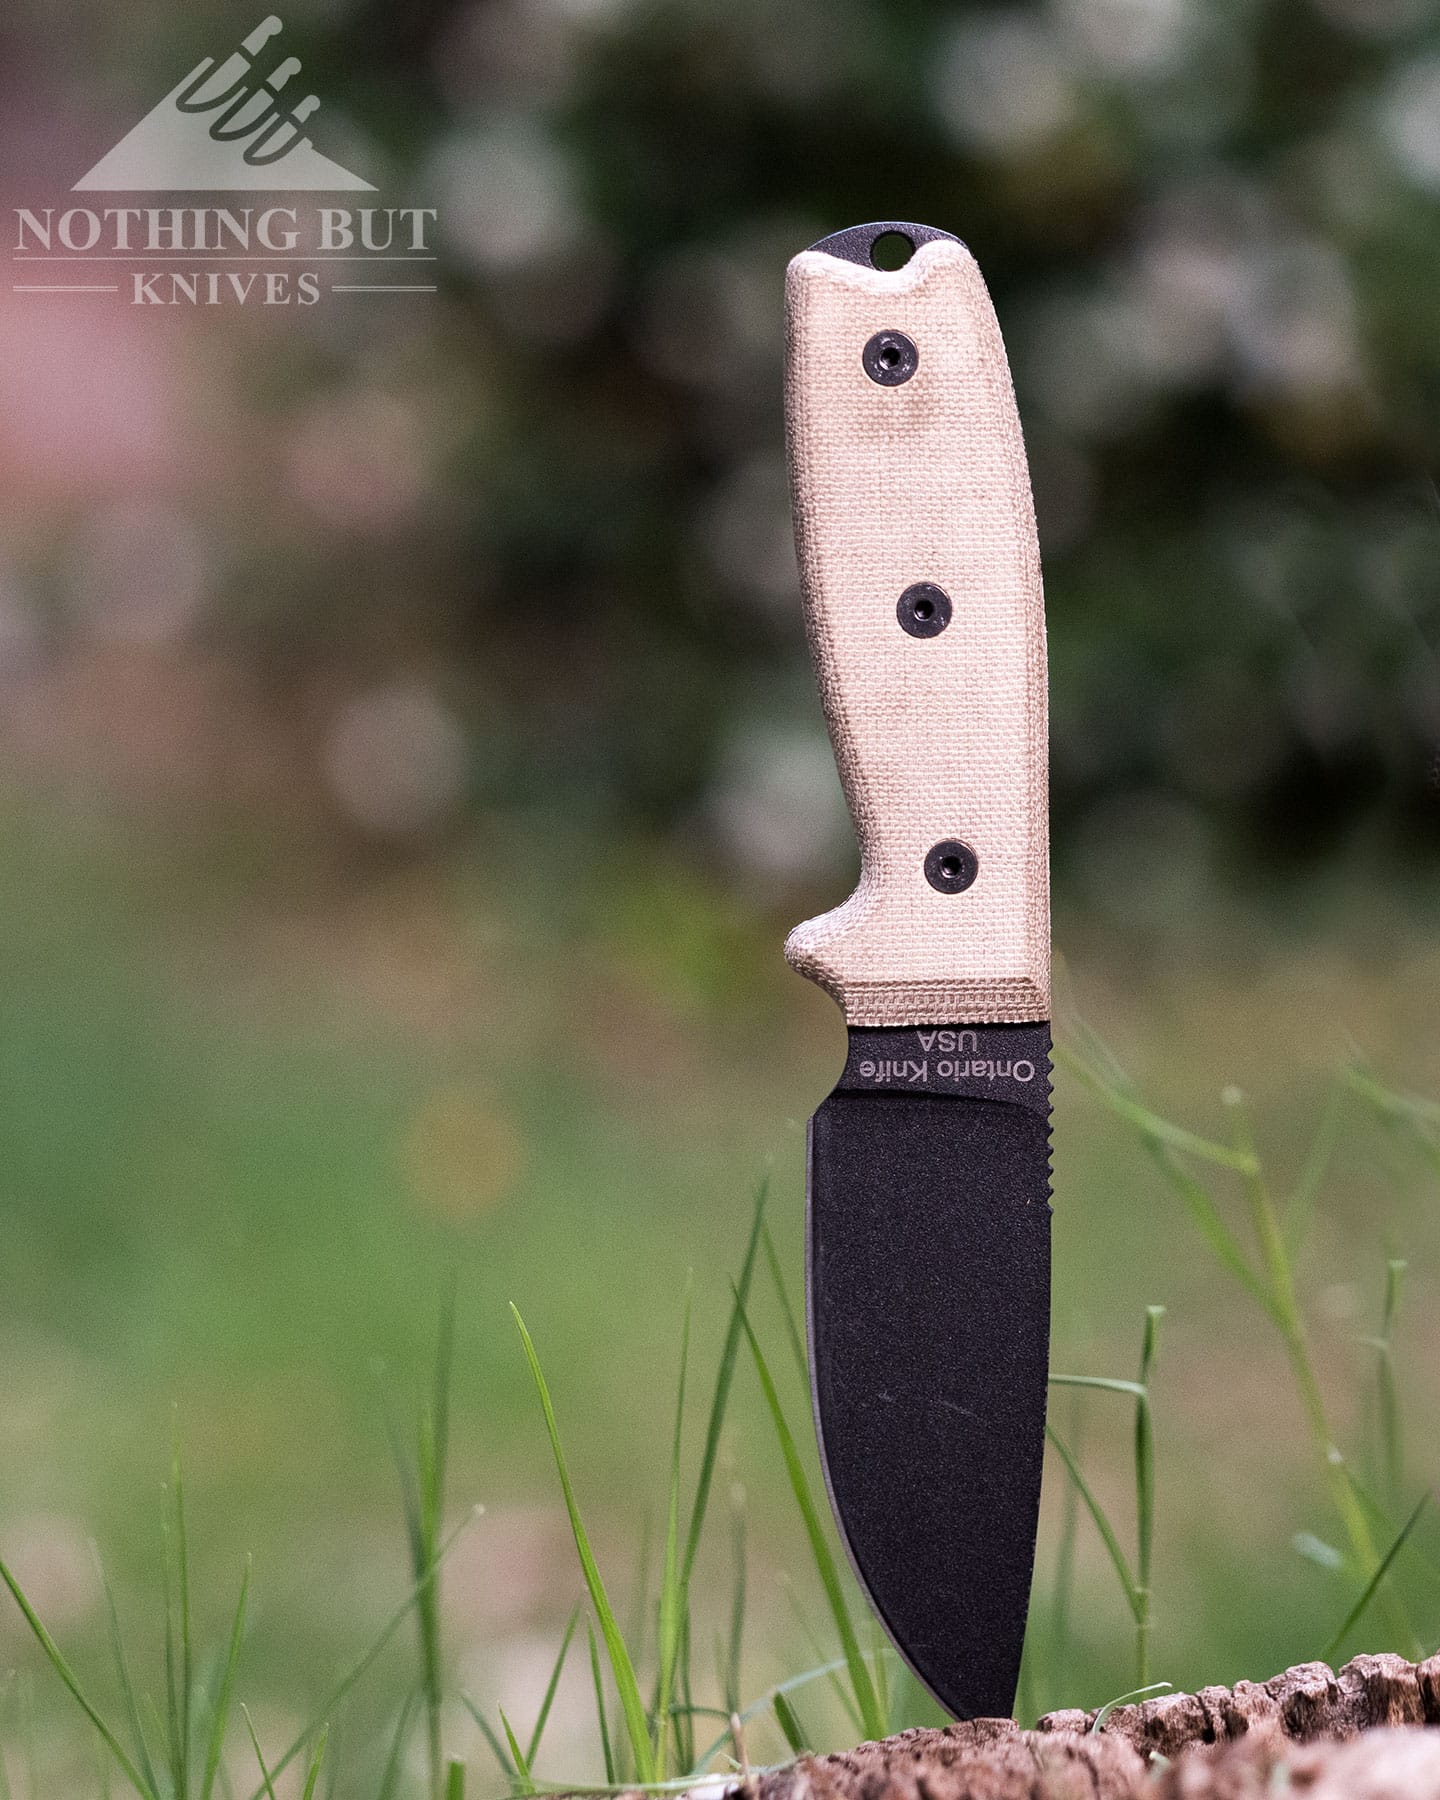 The Ontario Knife Company Rat 3 sticking out of a branch in a green field.